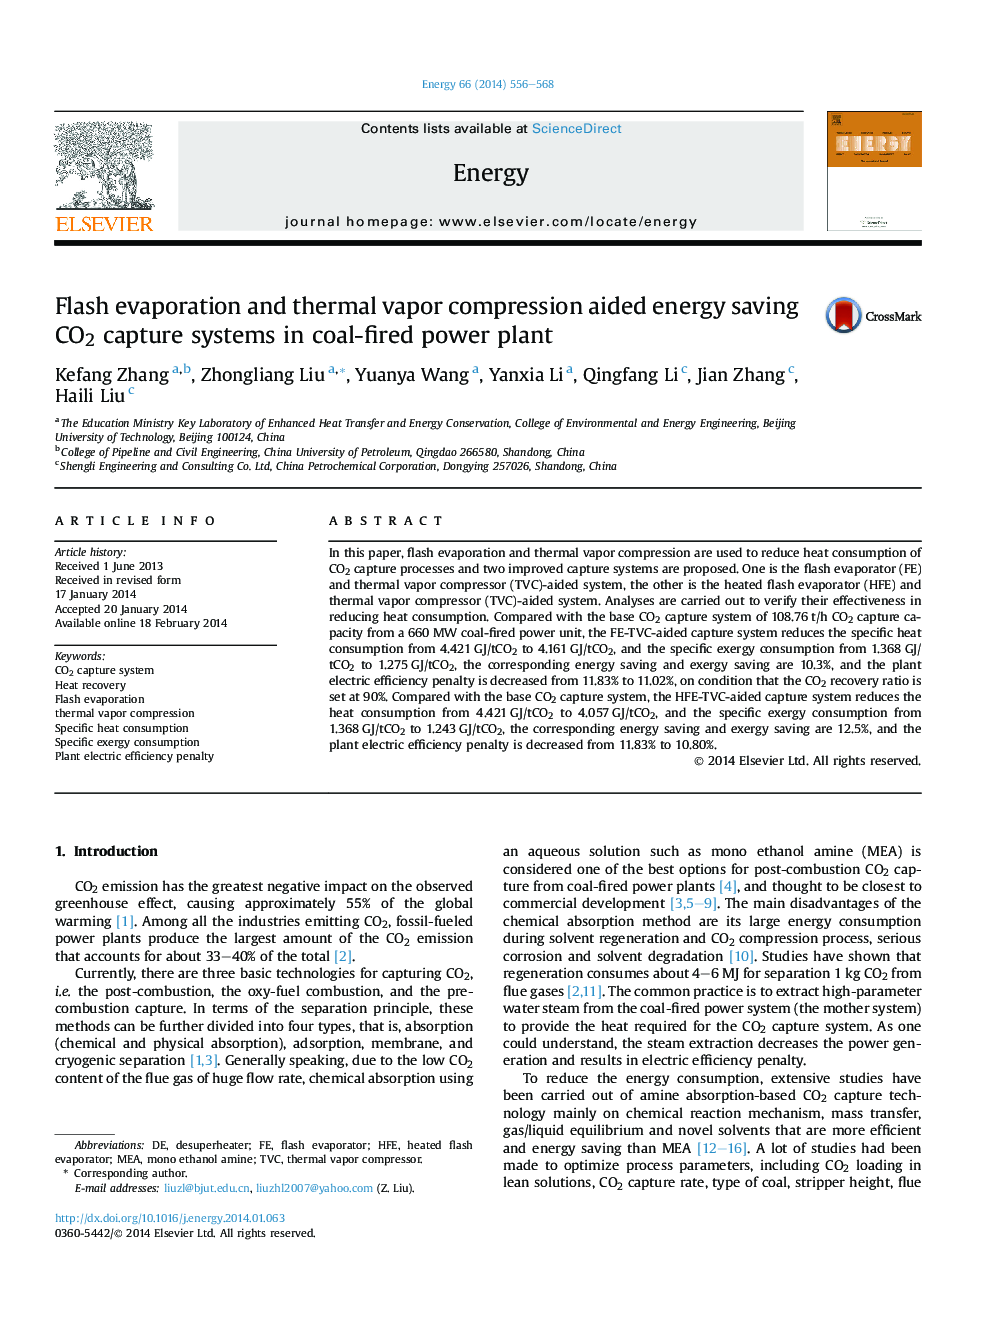 Flash evaporation and thermal vapor compression aided energy saving CO2 capture systems in coal-fired power plant